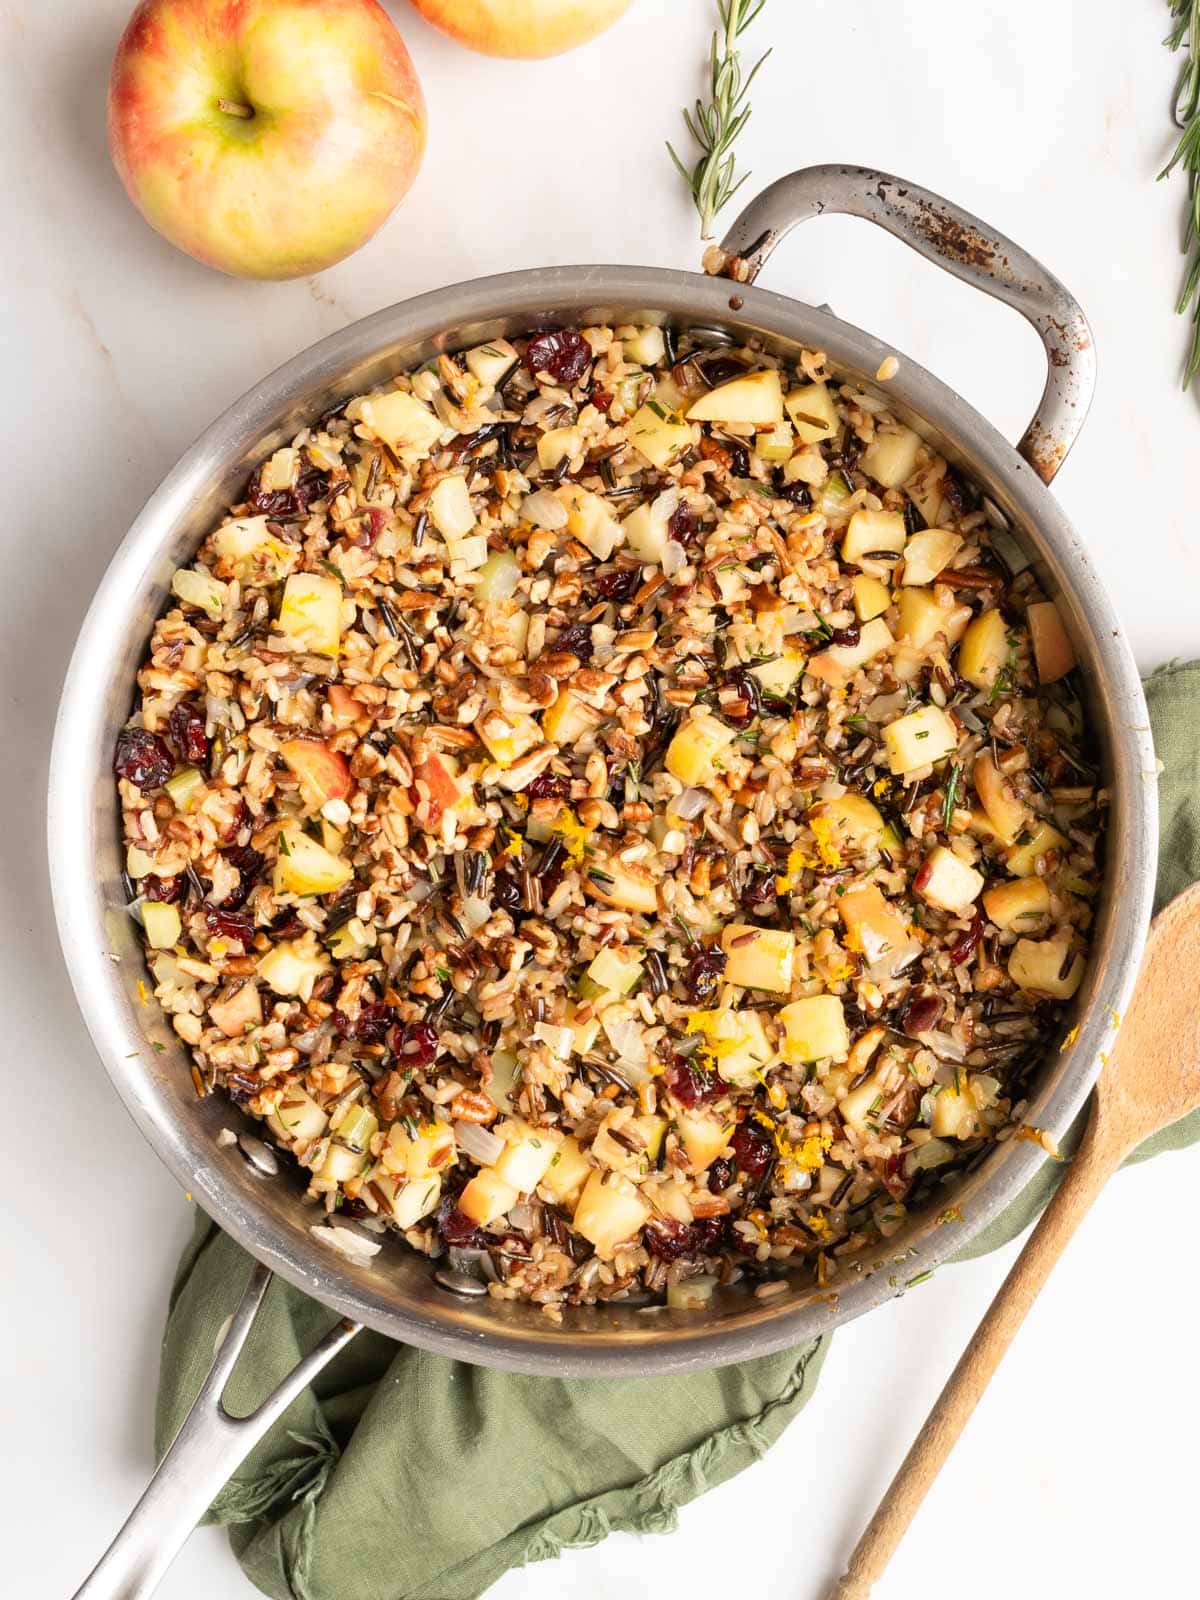 Wild rice with cranberries and apples in a pot.